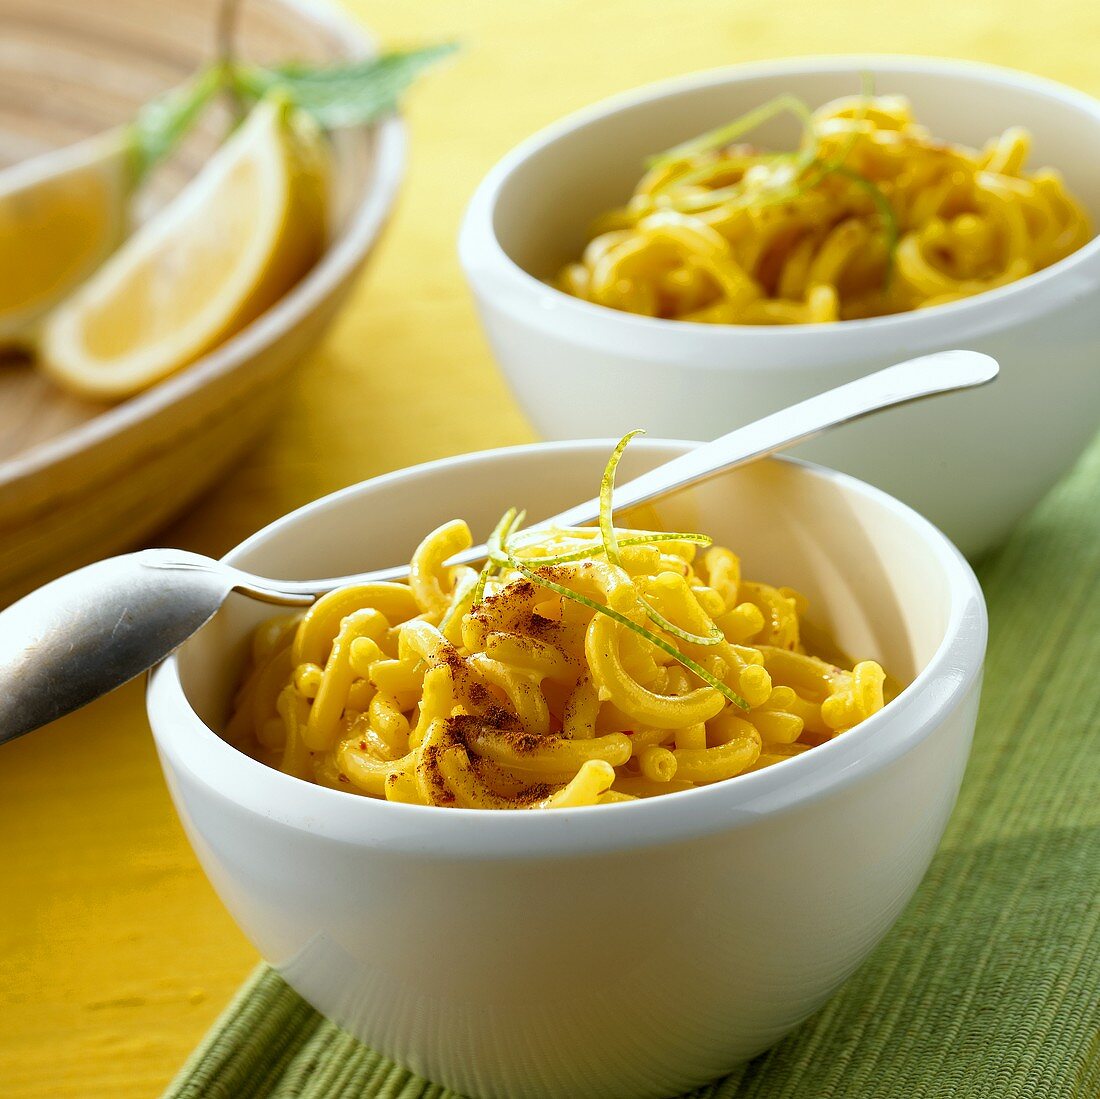 Sweet noodles with cinnamon and saffron (India)